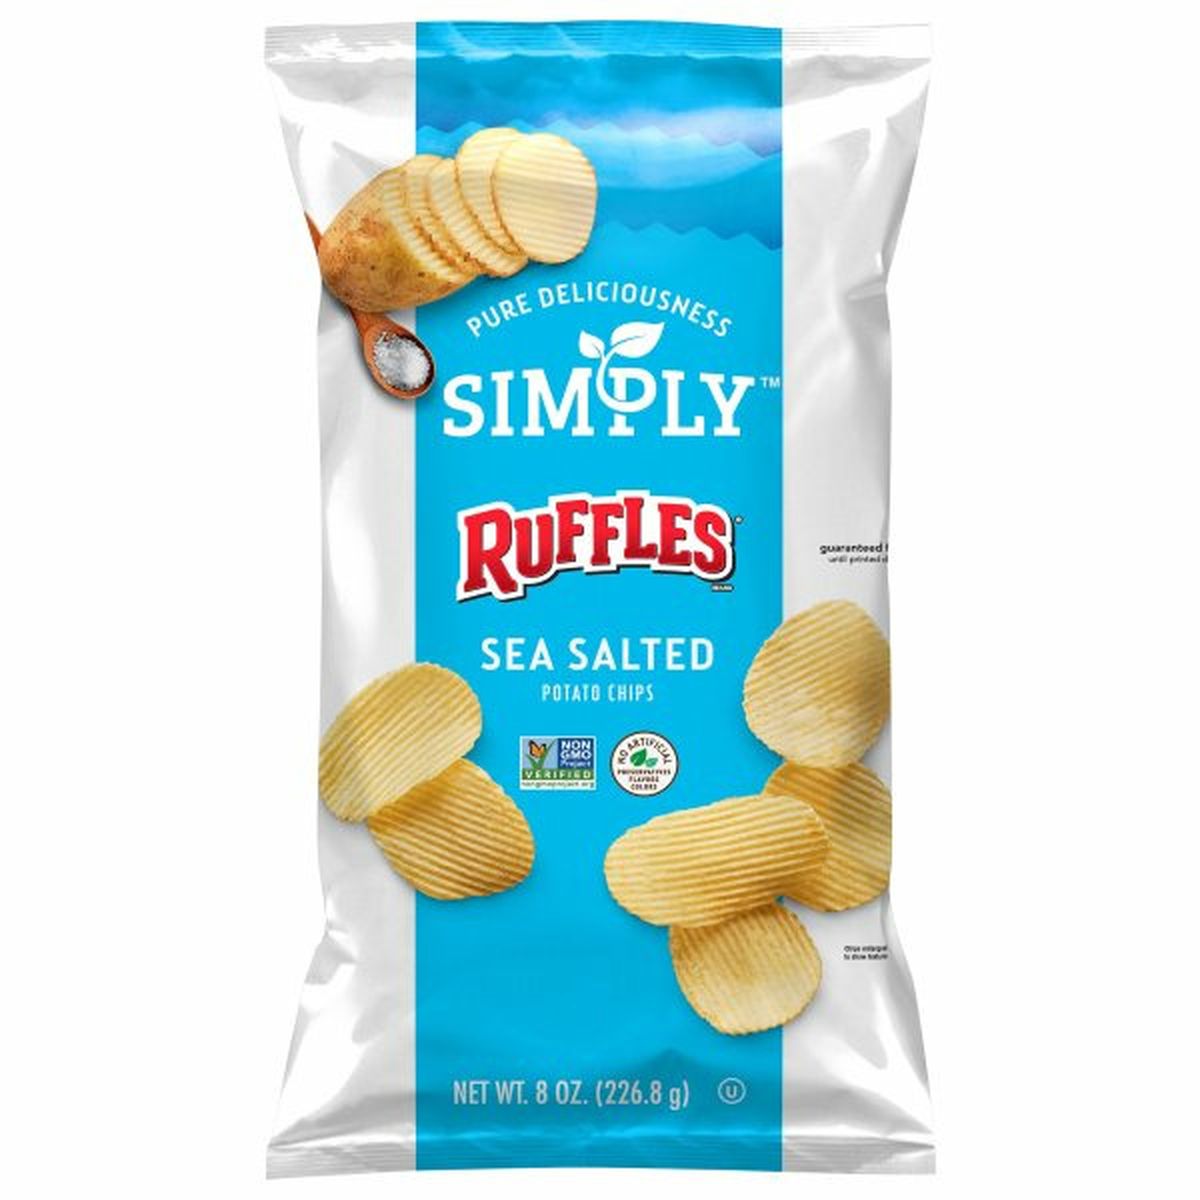 Calories in Ruffles Simply Potato Chips, Sea Salted